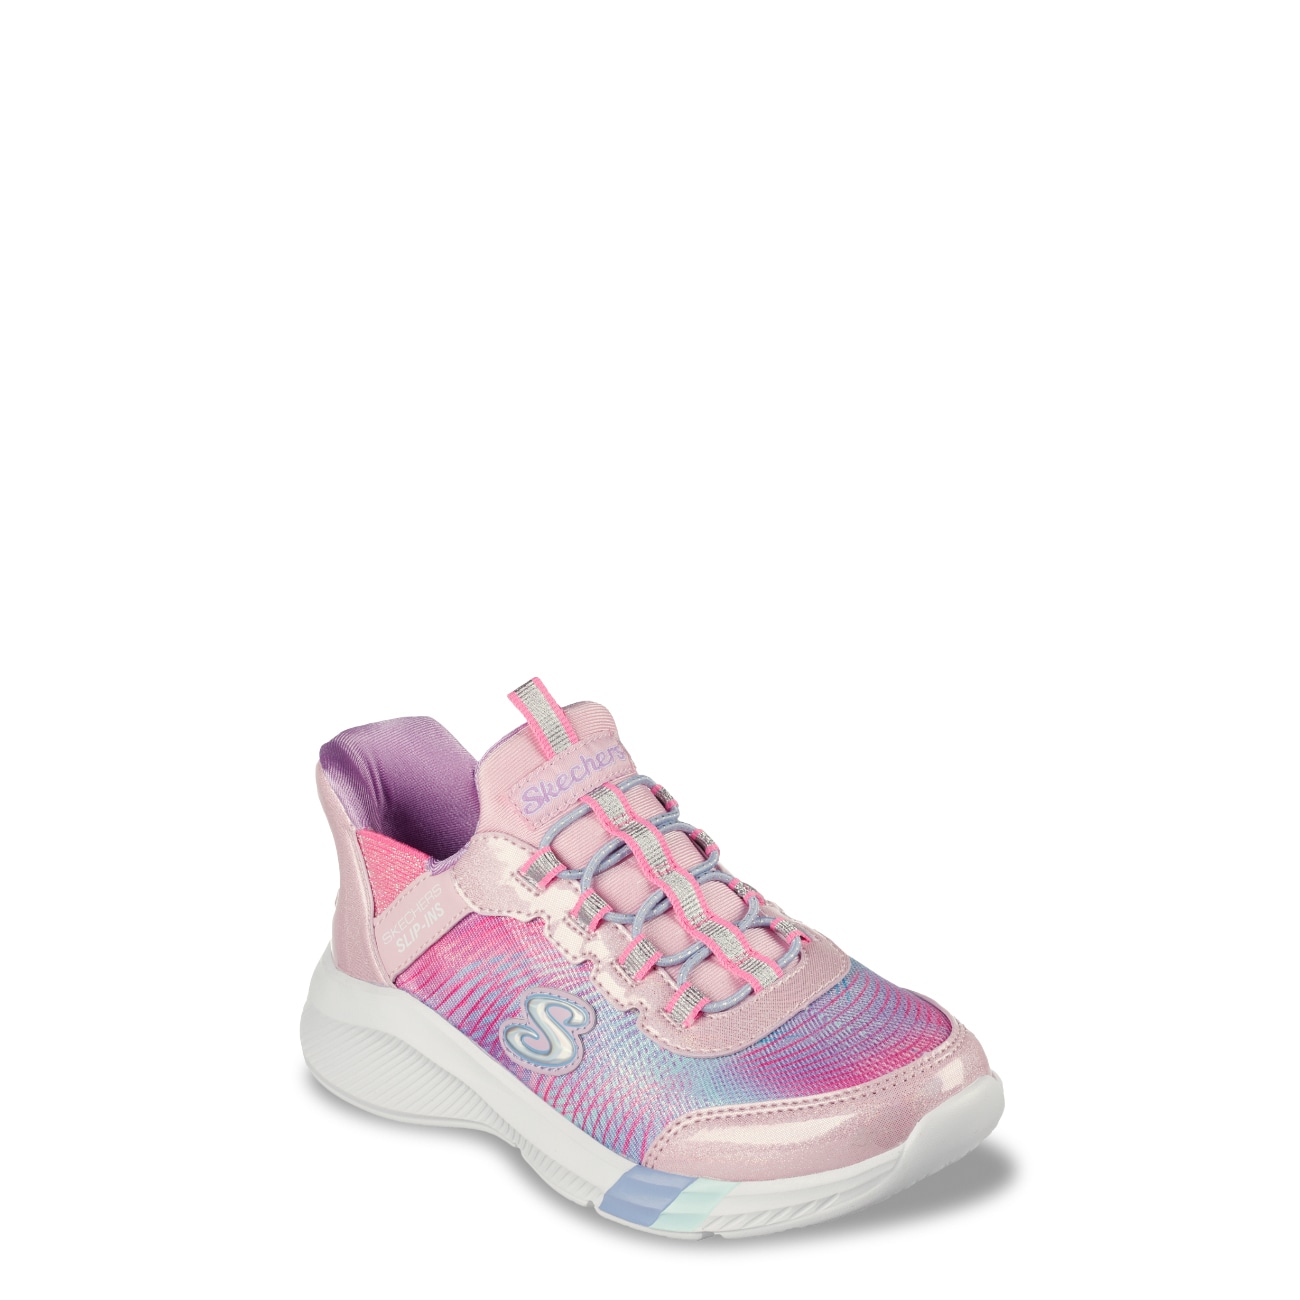 Youth Girls' Hands Free Slip-ins: Dreamy Lites - Colorful Prism Running Shoe